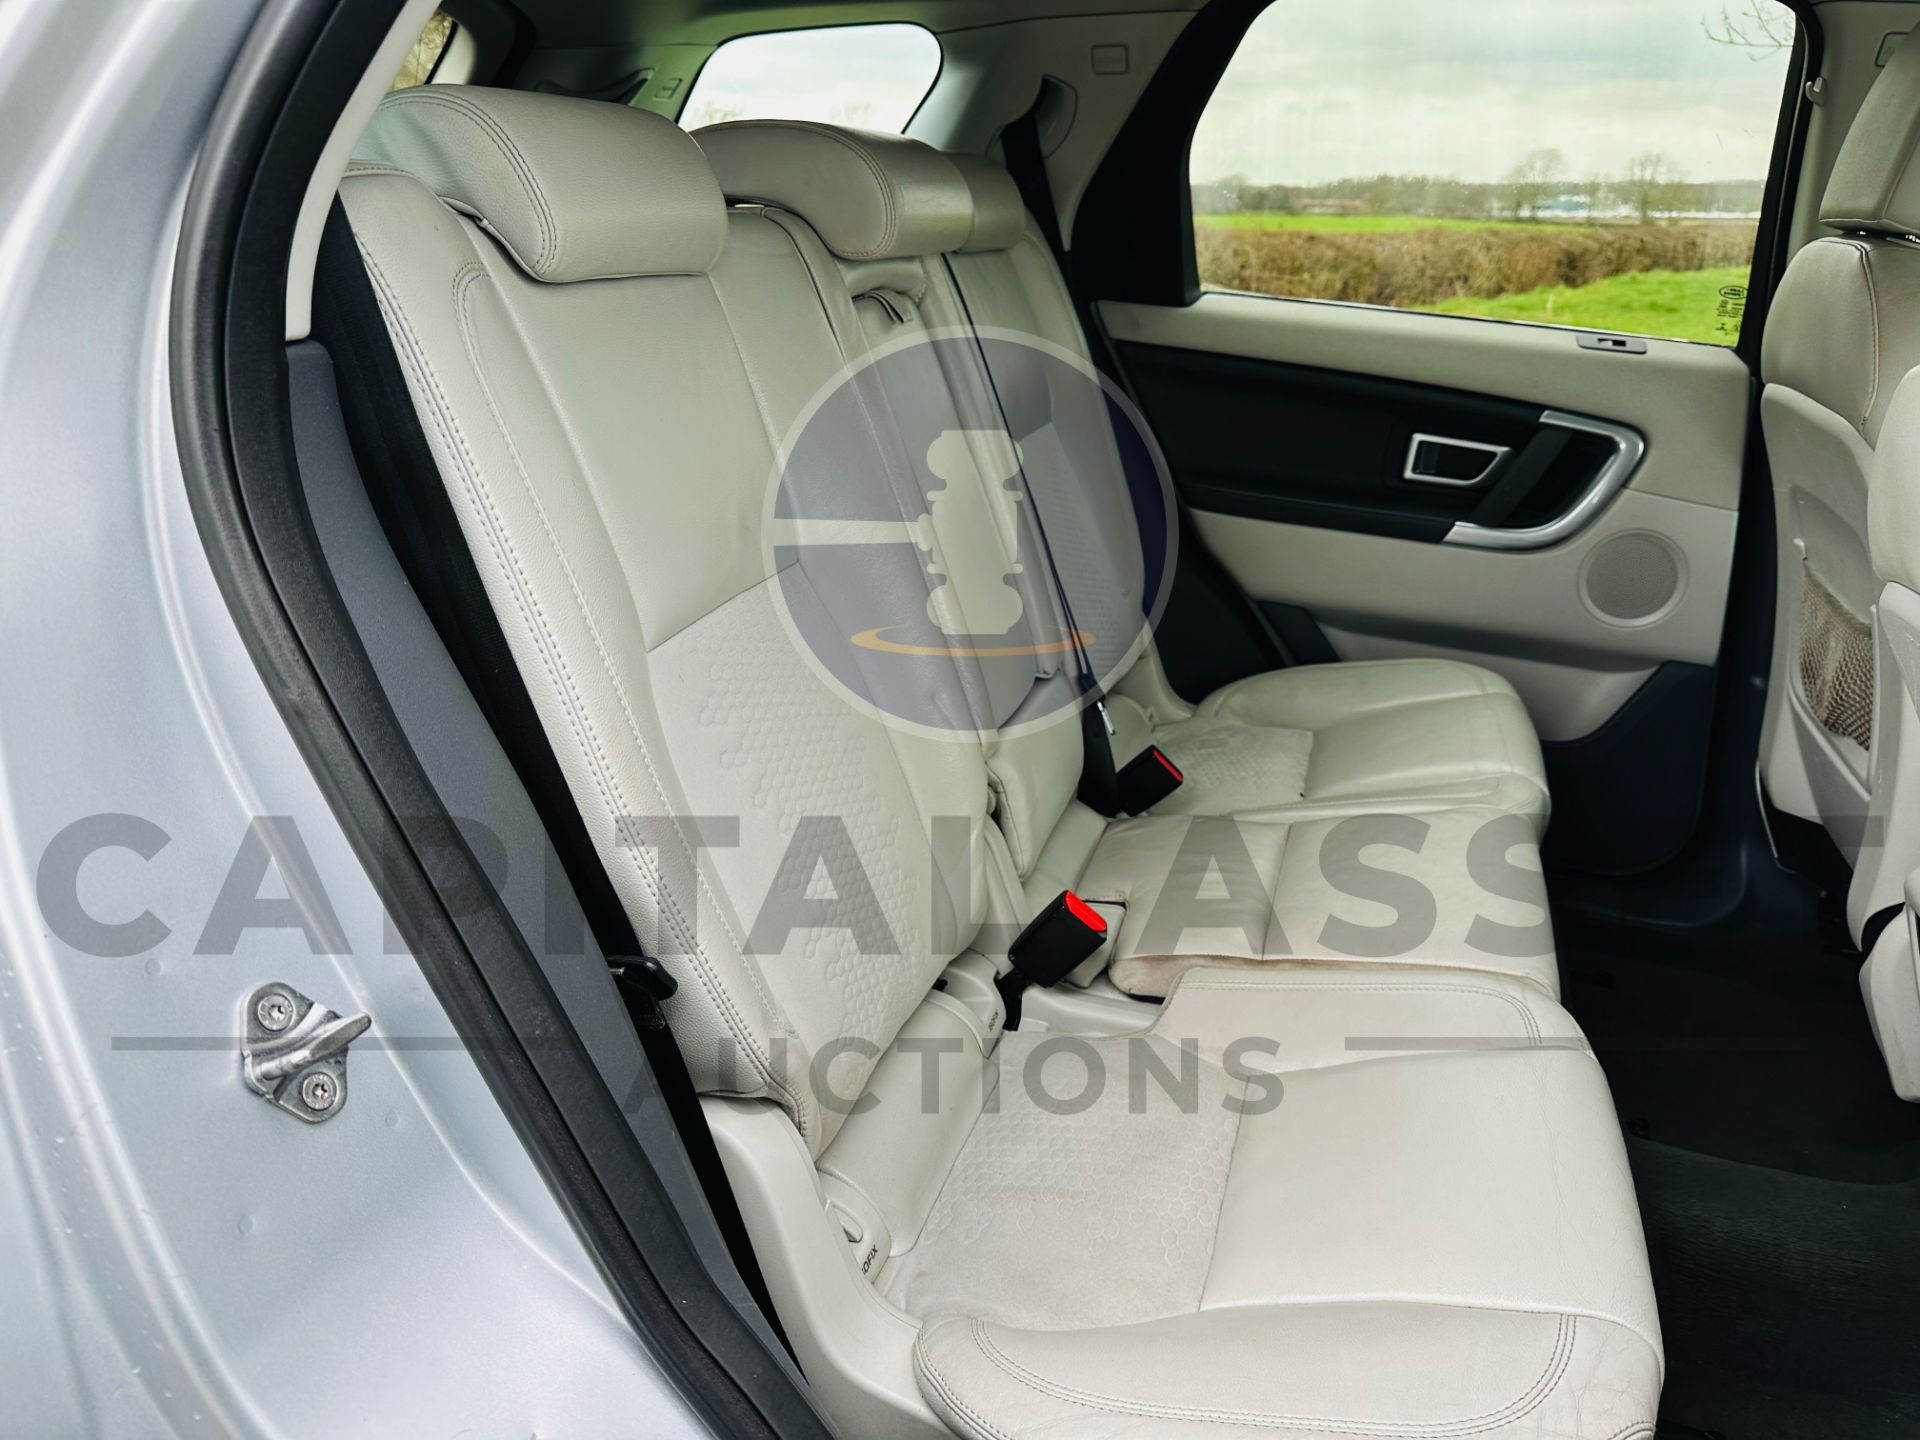 LAND ROVER DISCOVERY SPORT *SE TECH* 7 SEATER SUV (65 REG - EURO 6) 2.0 TD4 - AUTOMATIC - Image 12 of 38